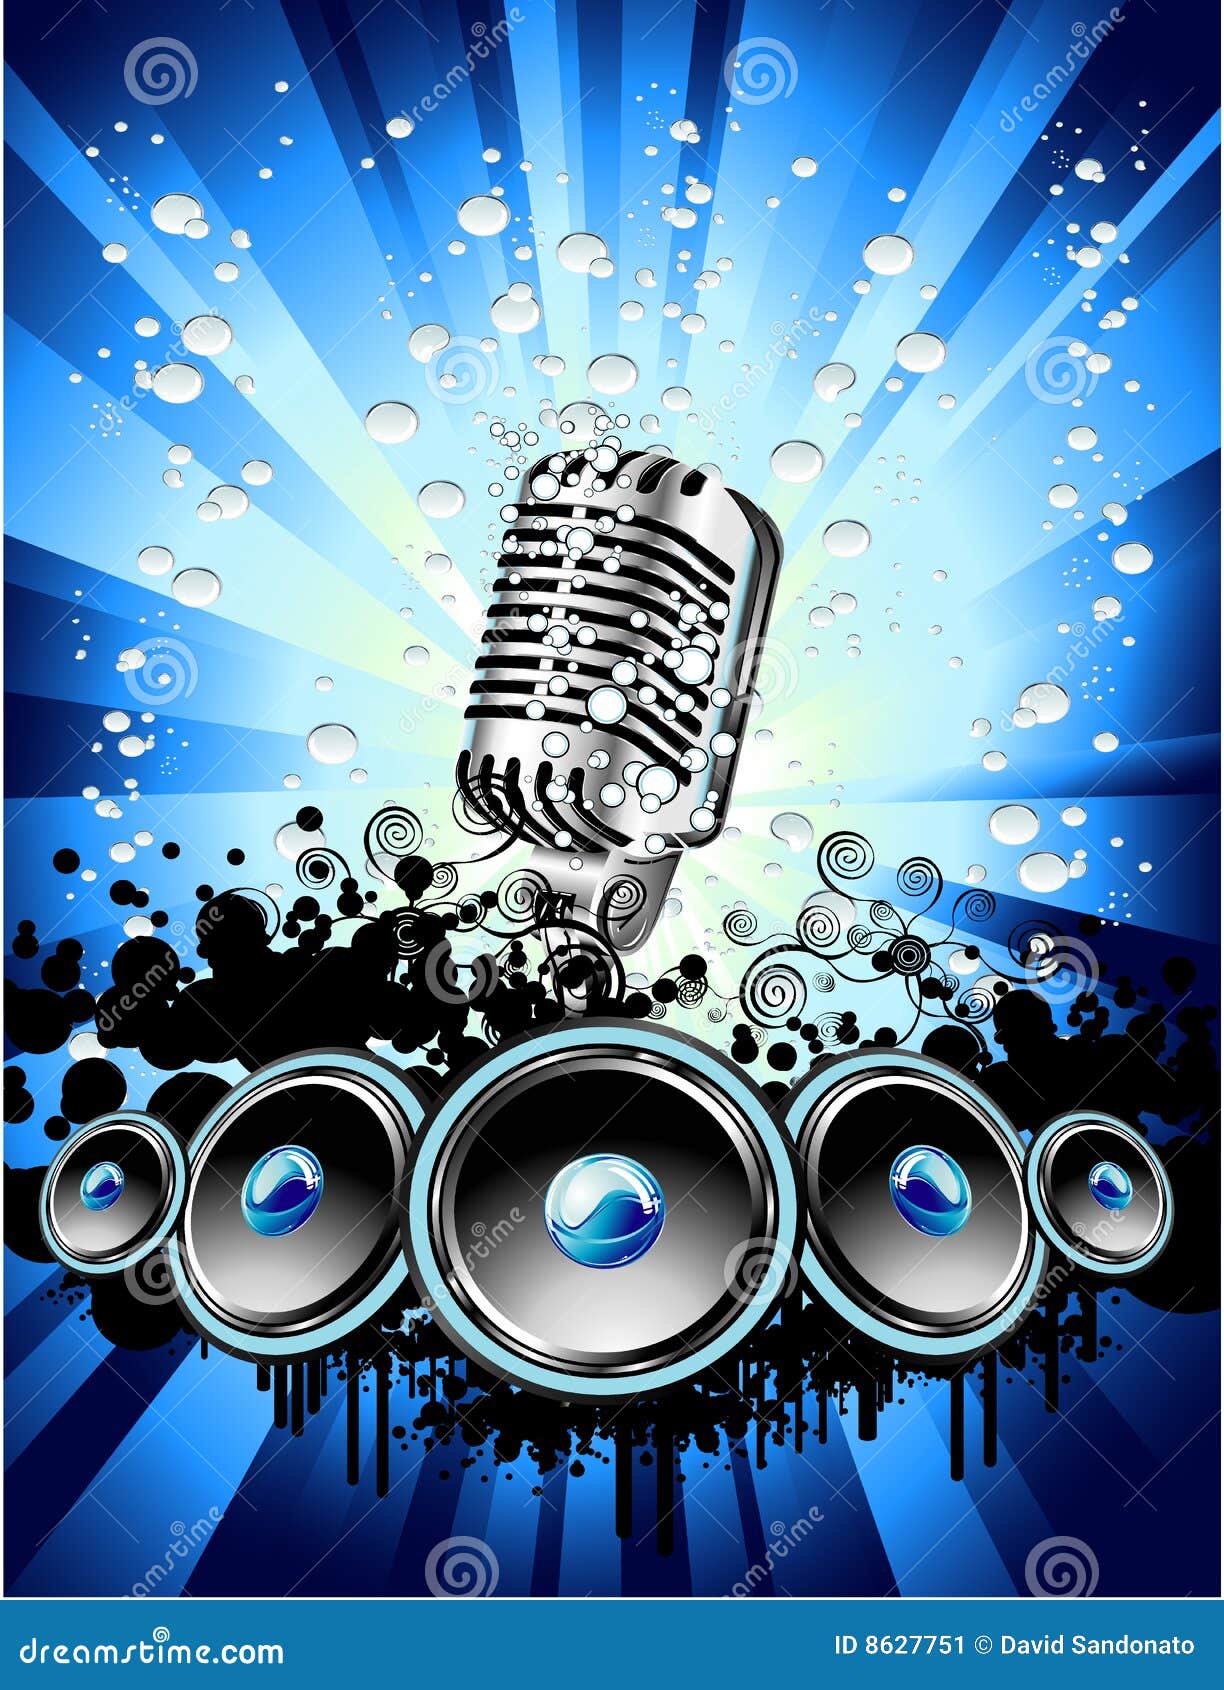 music event clipart - photo #12